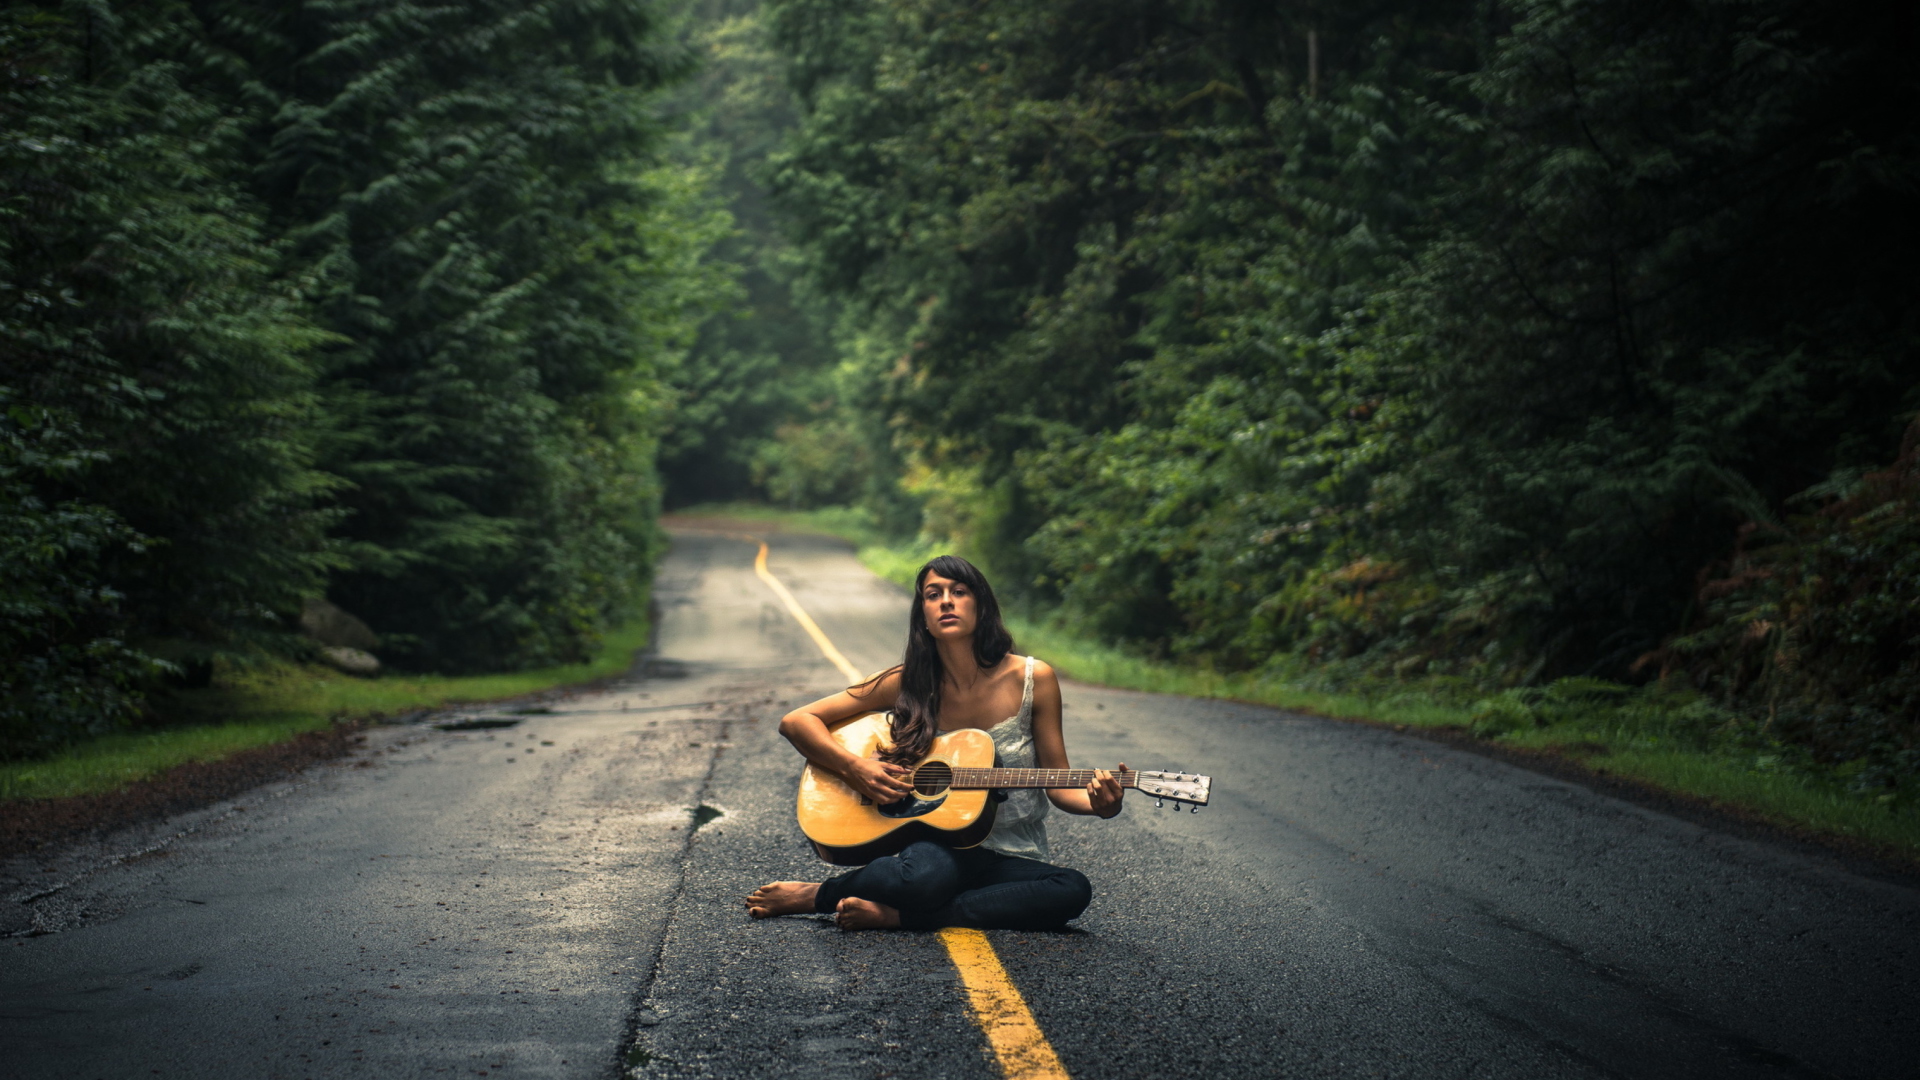 Girl Playing Guitar On Countryside Road wallpaper 1920x1080